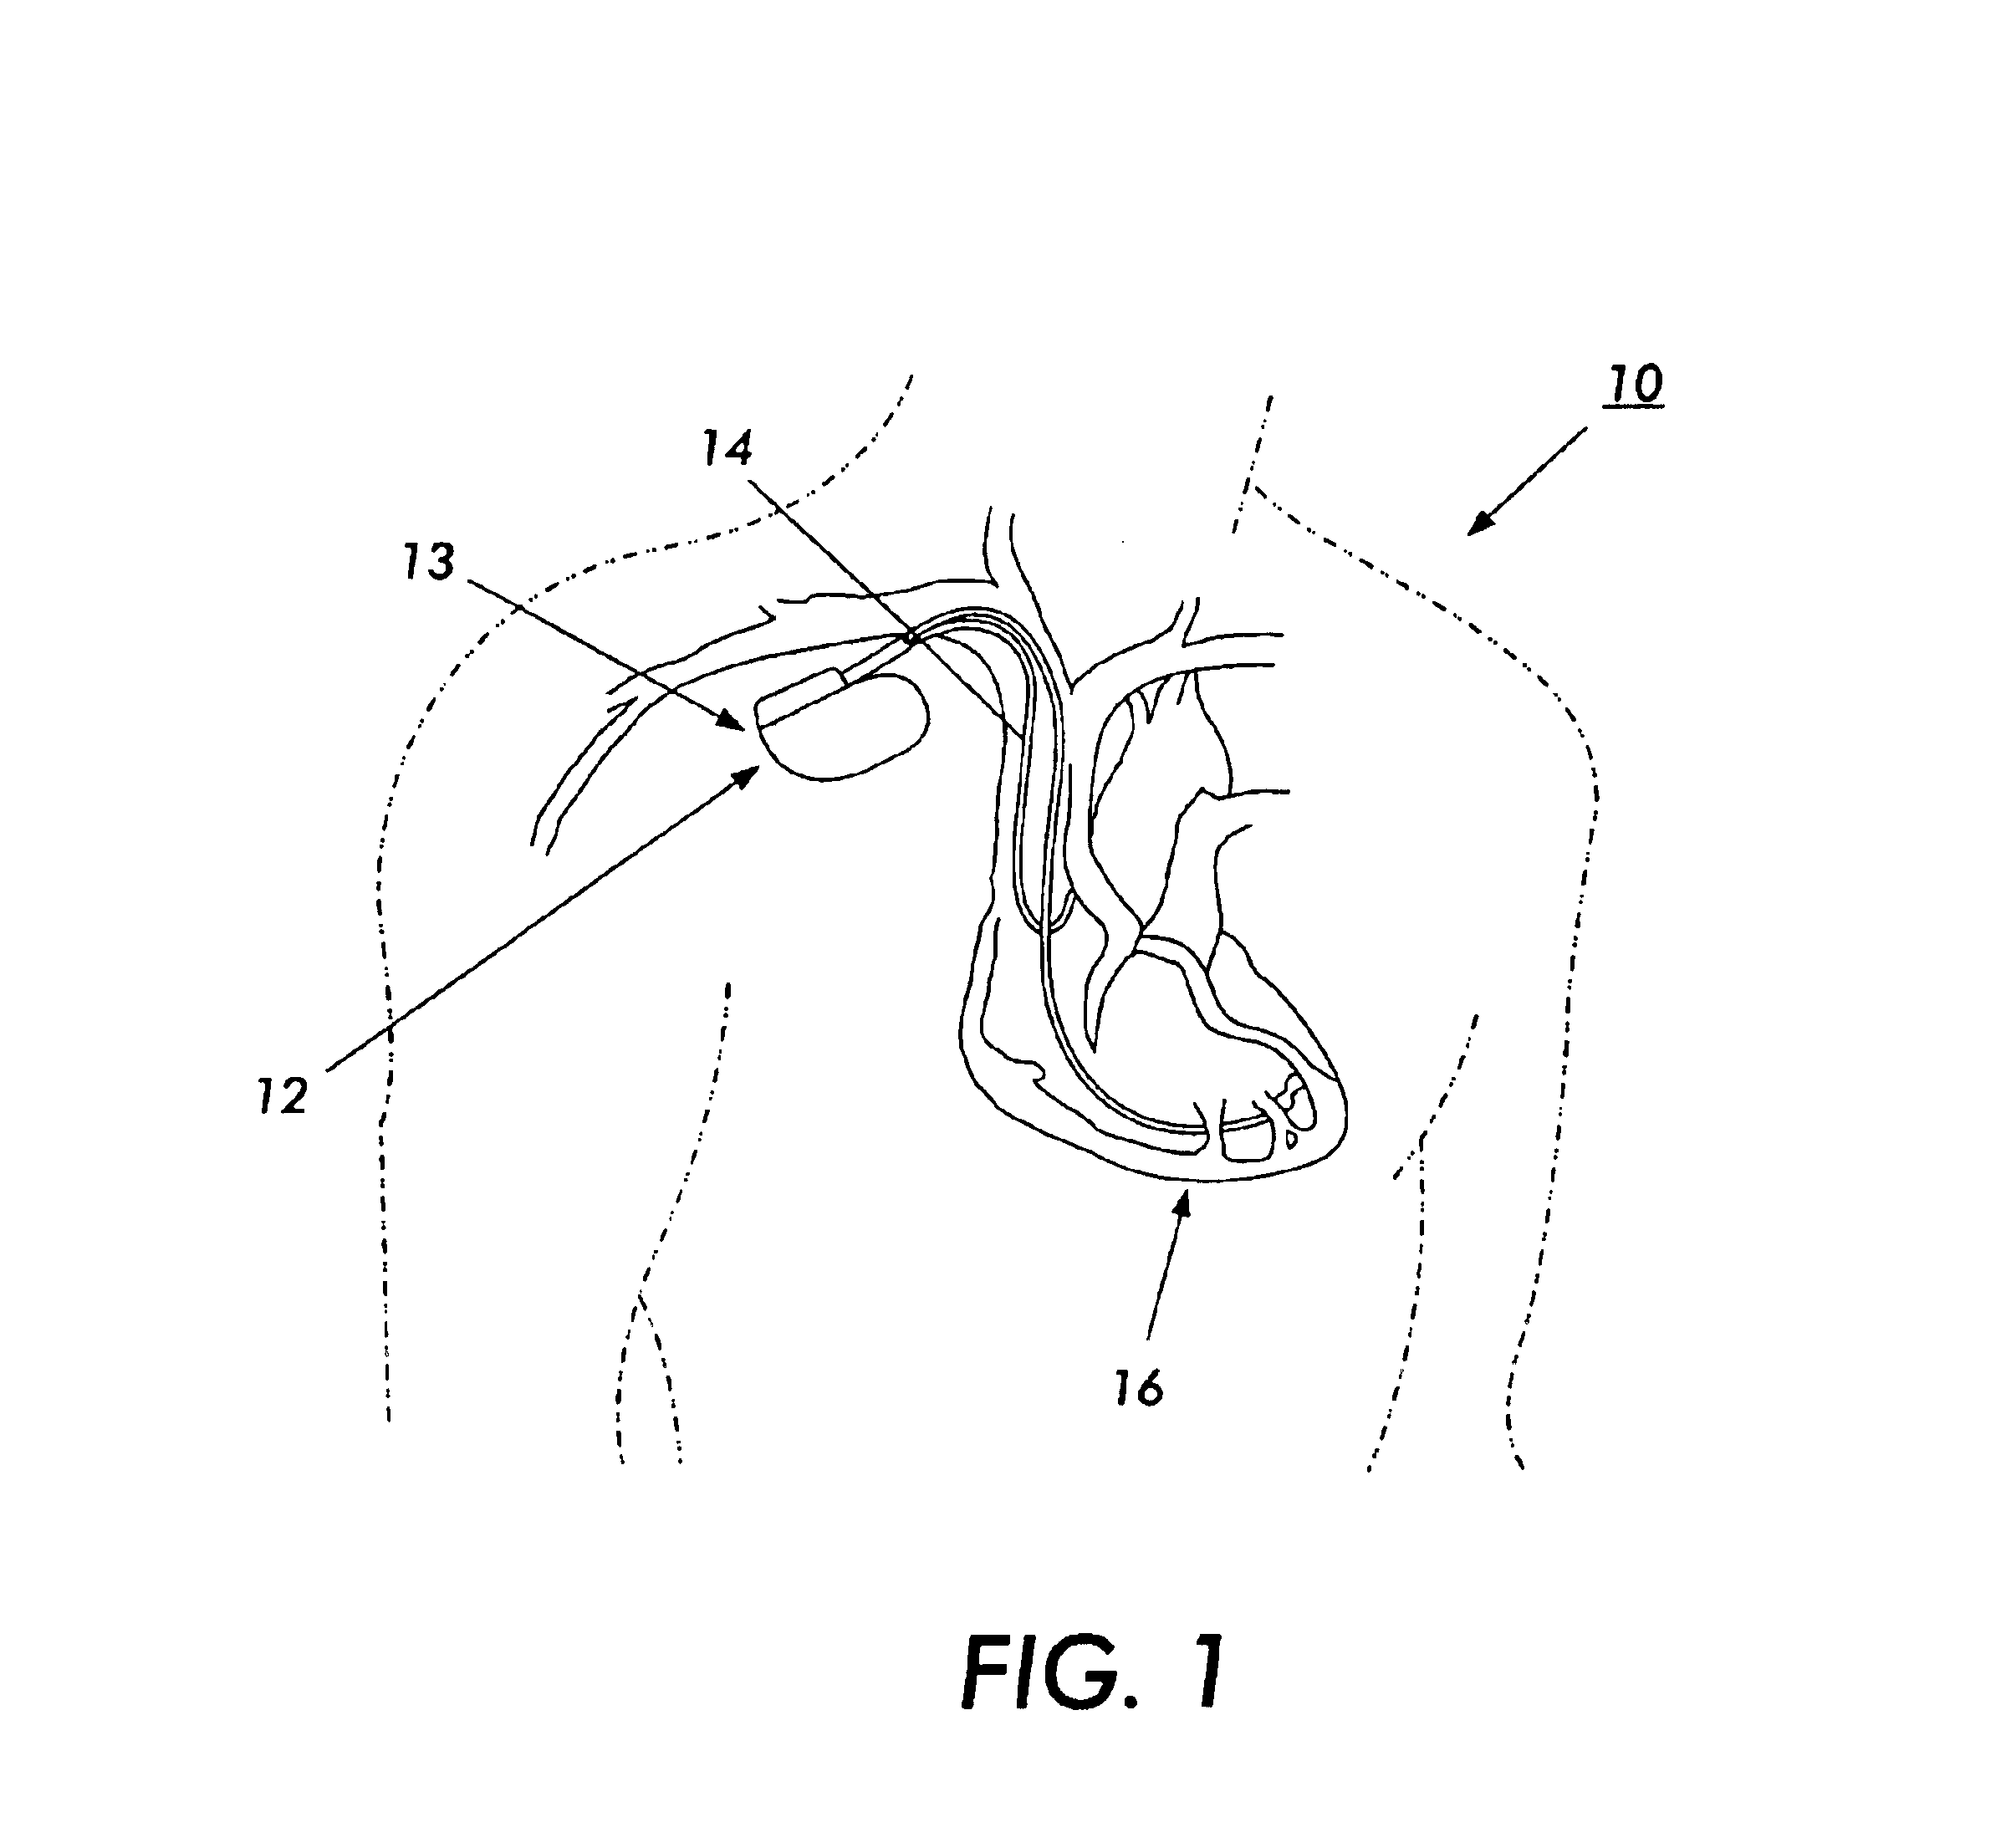 Electromagnetic interference immune tissue invasive system